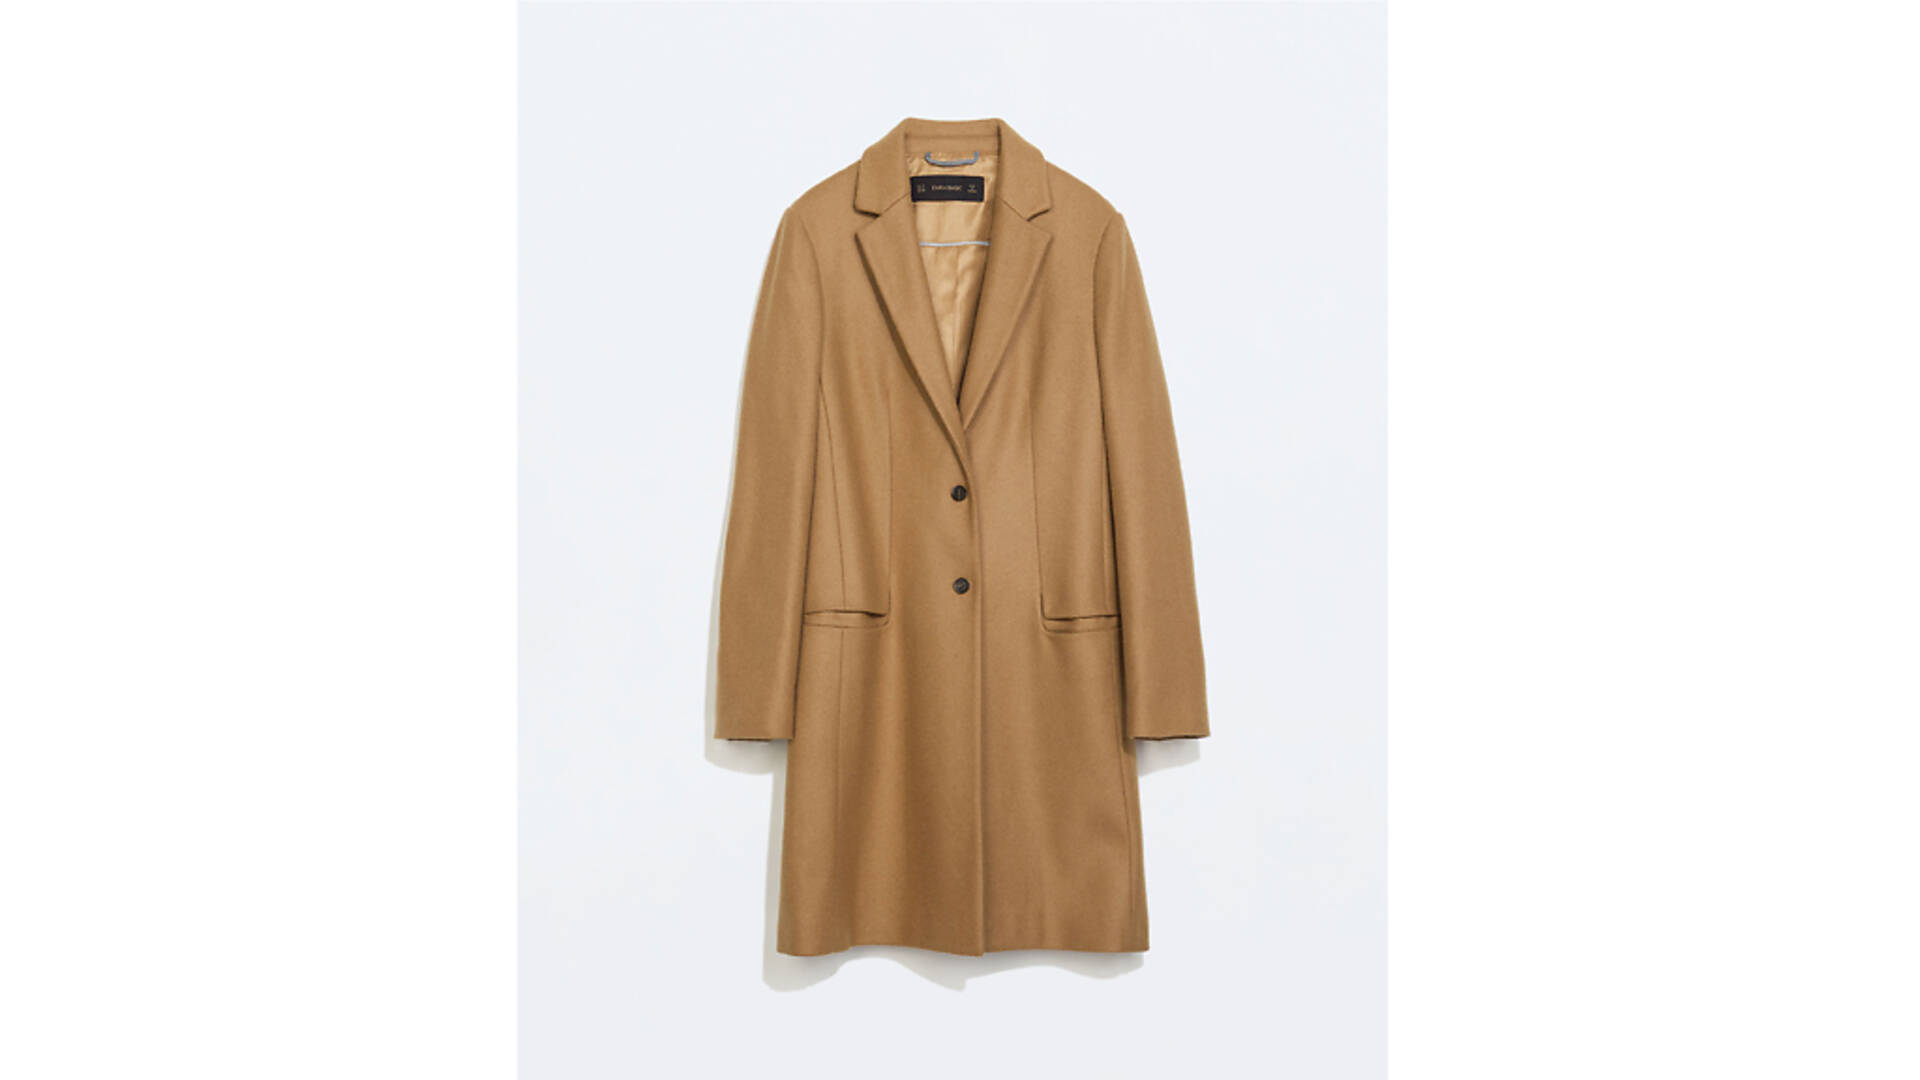 Camel coat styles for women this winter in NYC